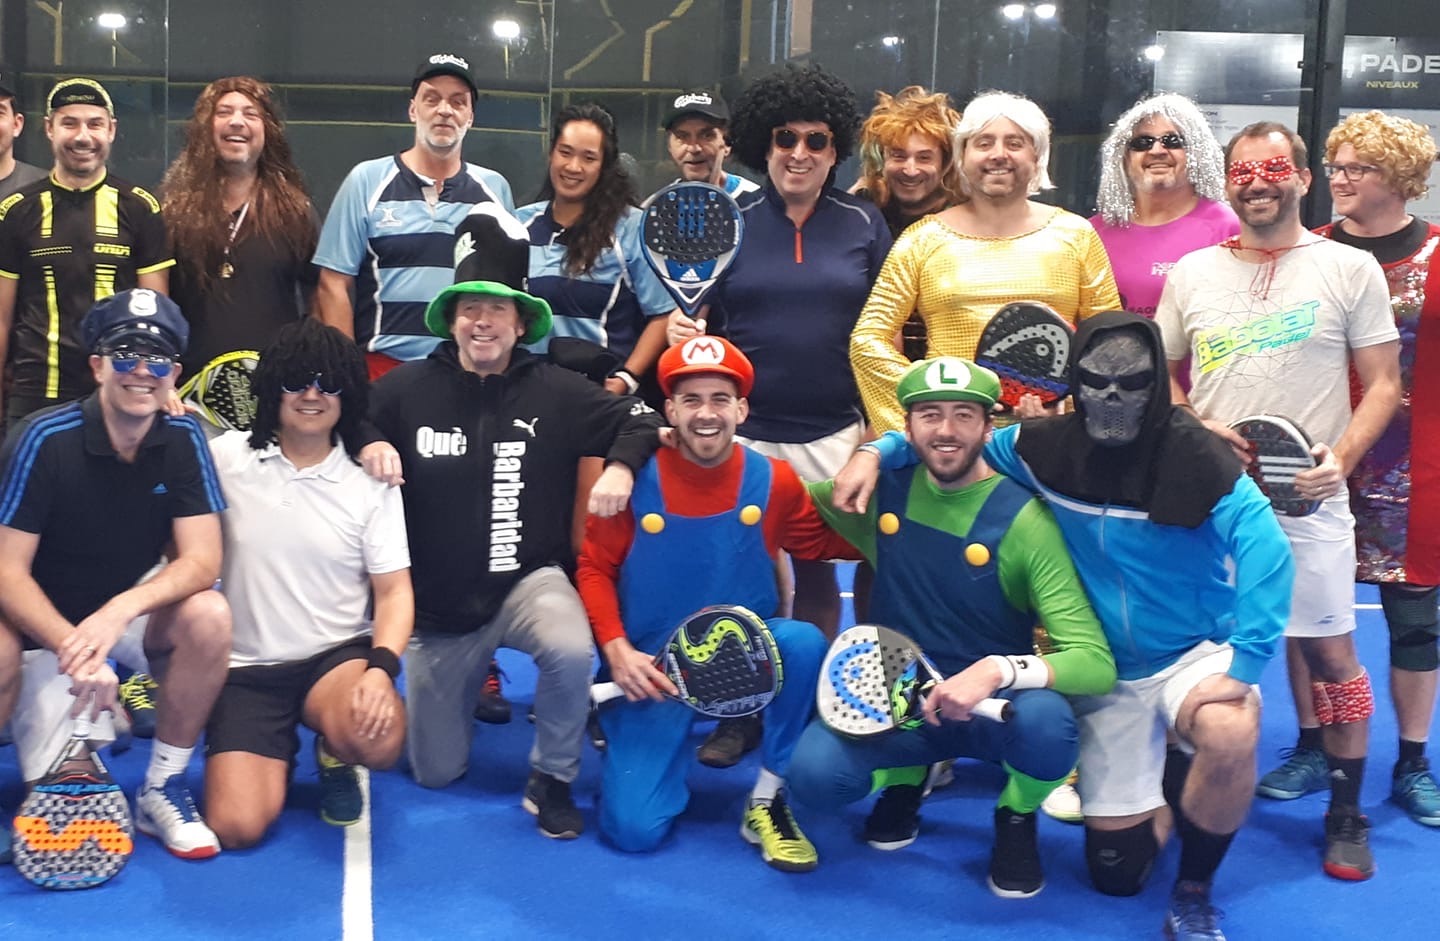 FAPO spreads its wings at 4PADEL Bordeaux  